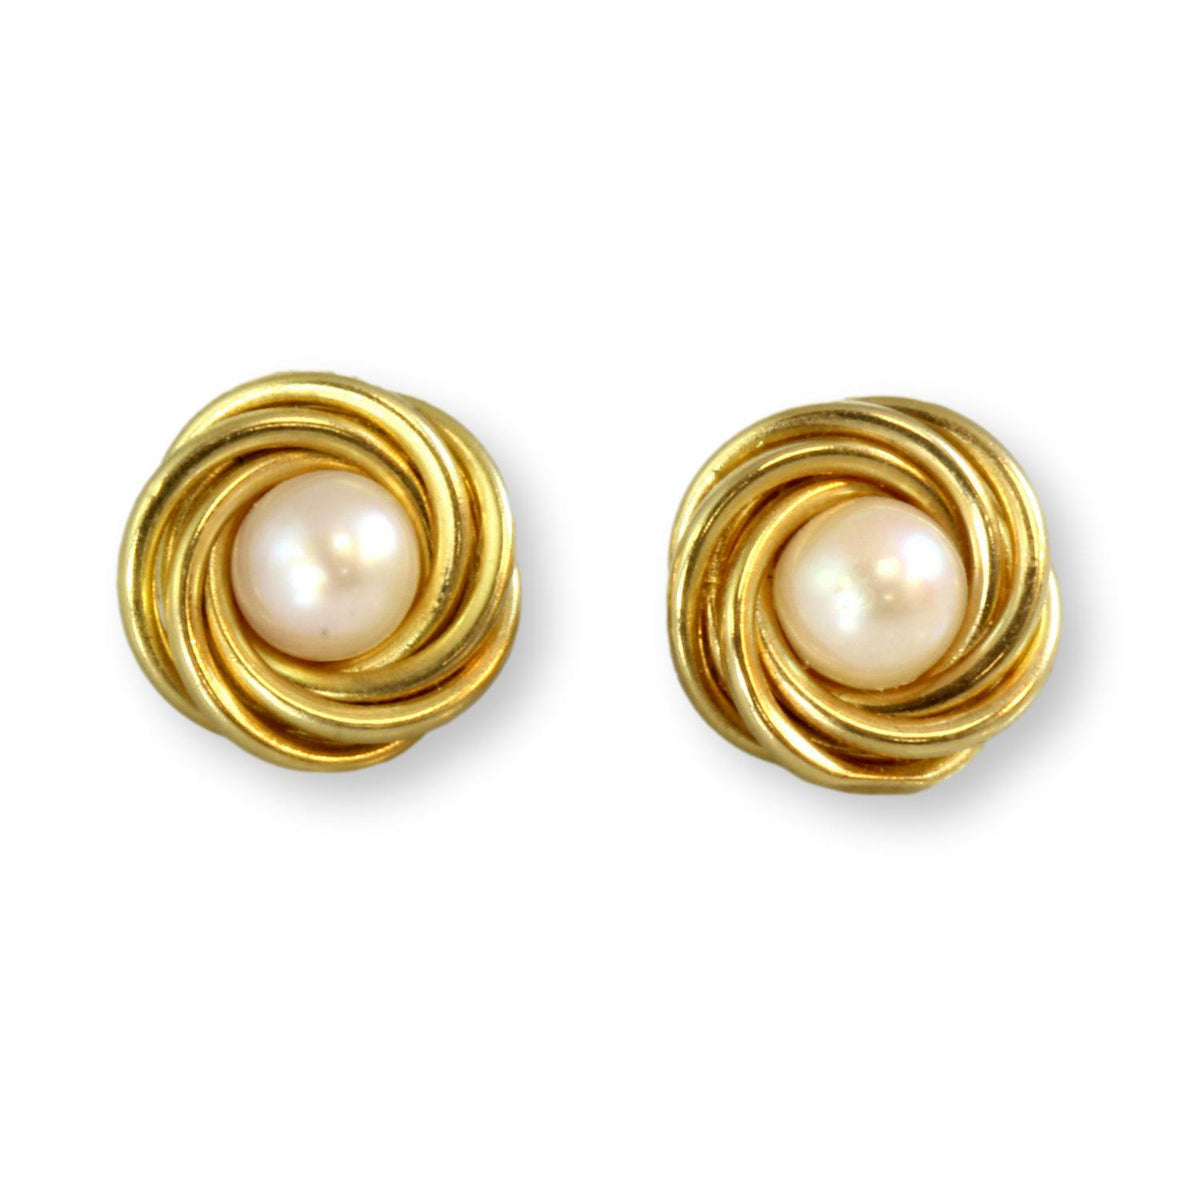 7mm Cultured Mabe Pearl 14K Gold Love Knot Earrings